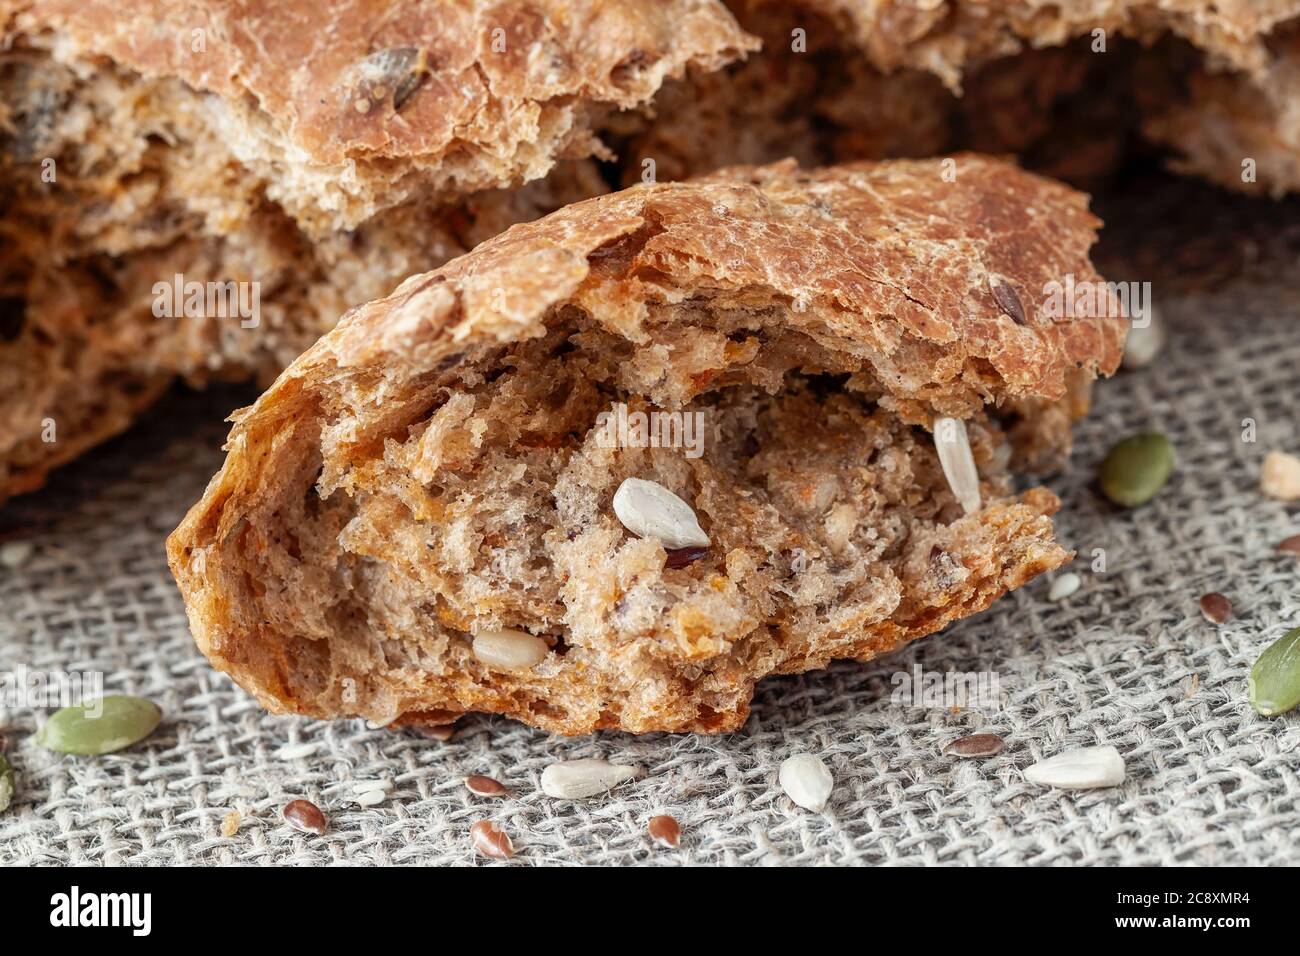 Uneven piece of multigrain bread, whole pumpkin seed, sunflower and flax seeds Stock Photo